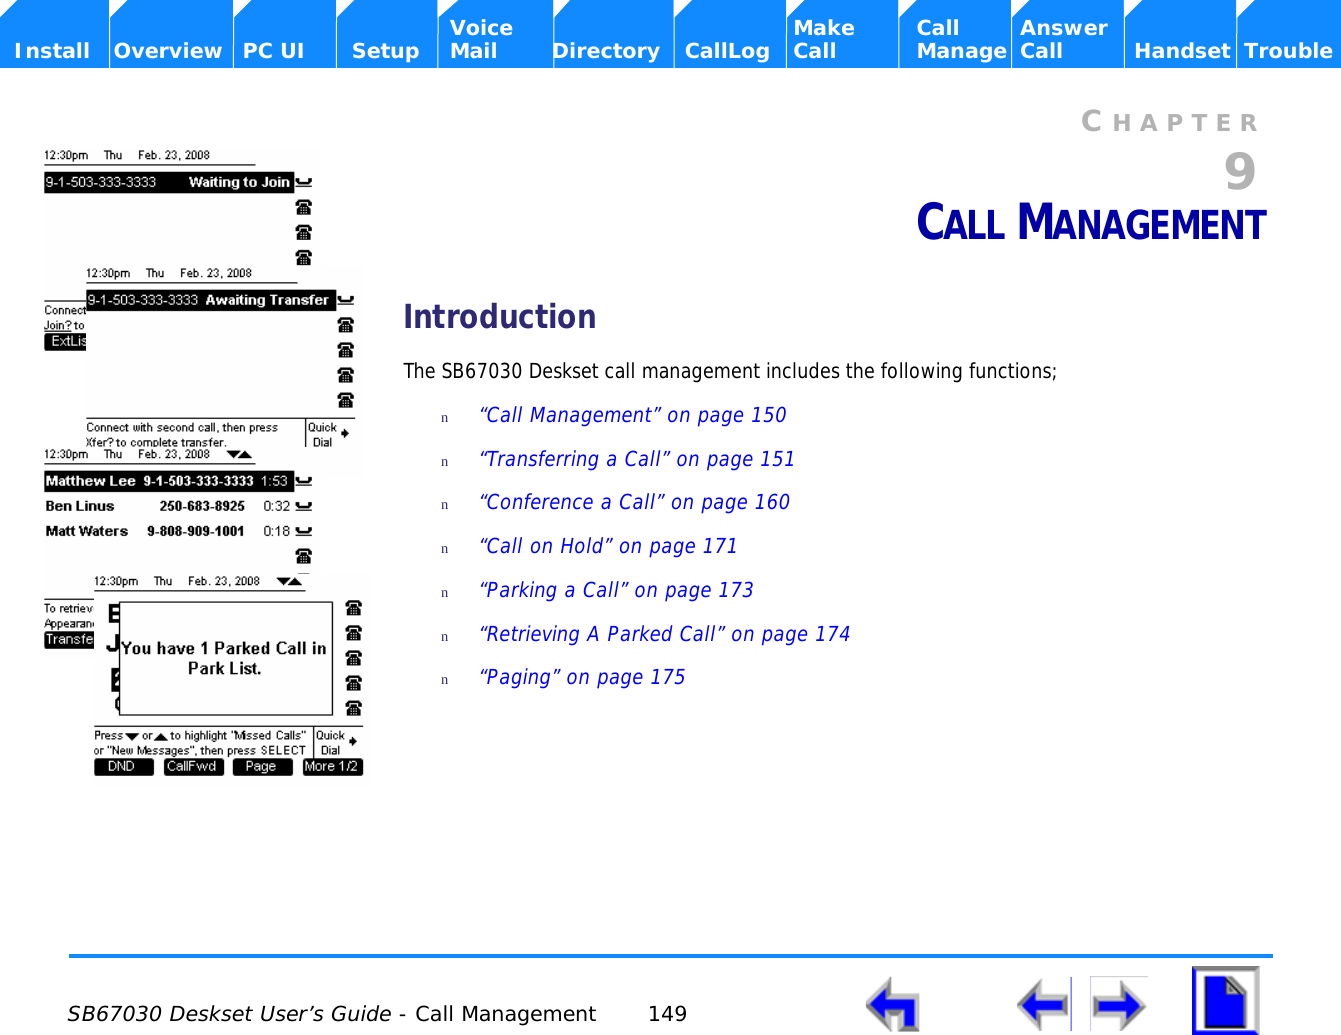  SB67030 Deskset User’s Guide - Call Management 149    Voice Make Call Answer  Install Overview PC UI Setup Mail Directory CallLog Call Manage Call Handset TroubleCHAPTER9CALL MANAGEMENTIntroductionThe SB67030 Deskset call management includes the following functions;n“Call Management” on page 150n“Transferring a Call” on page 151n“Conference a Call” on page 160n“Call on Hold” on page 171n“Parking a Call” on page 173n“Retrieving A Parked Call” on page 174n“Paging” on page 175